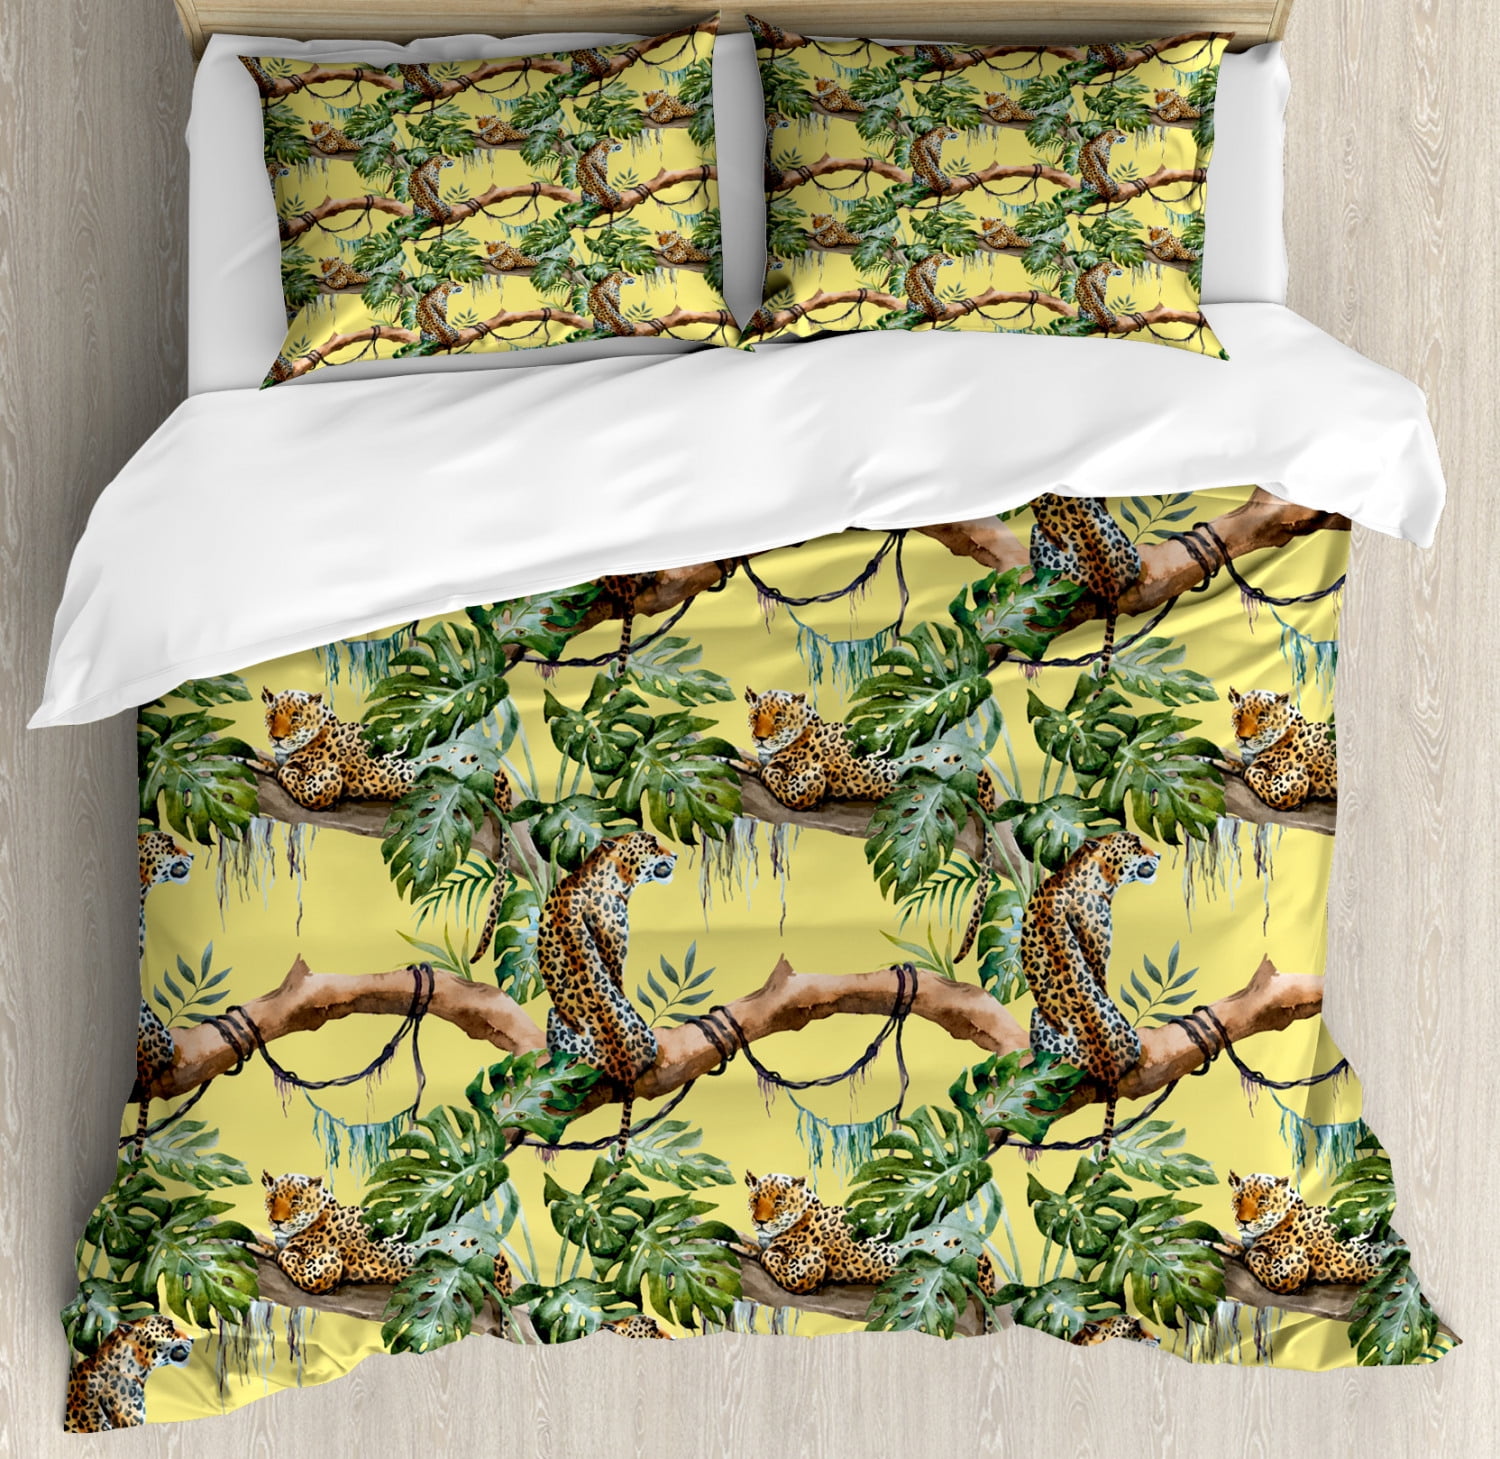 Watercolor Duvet Cover Set Leopards In The Jungle Tropical Scene